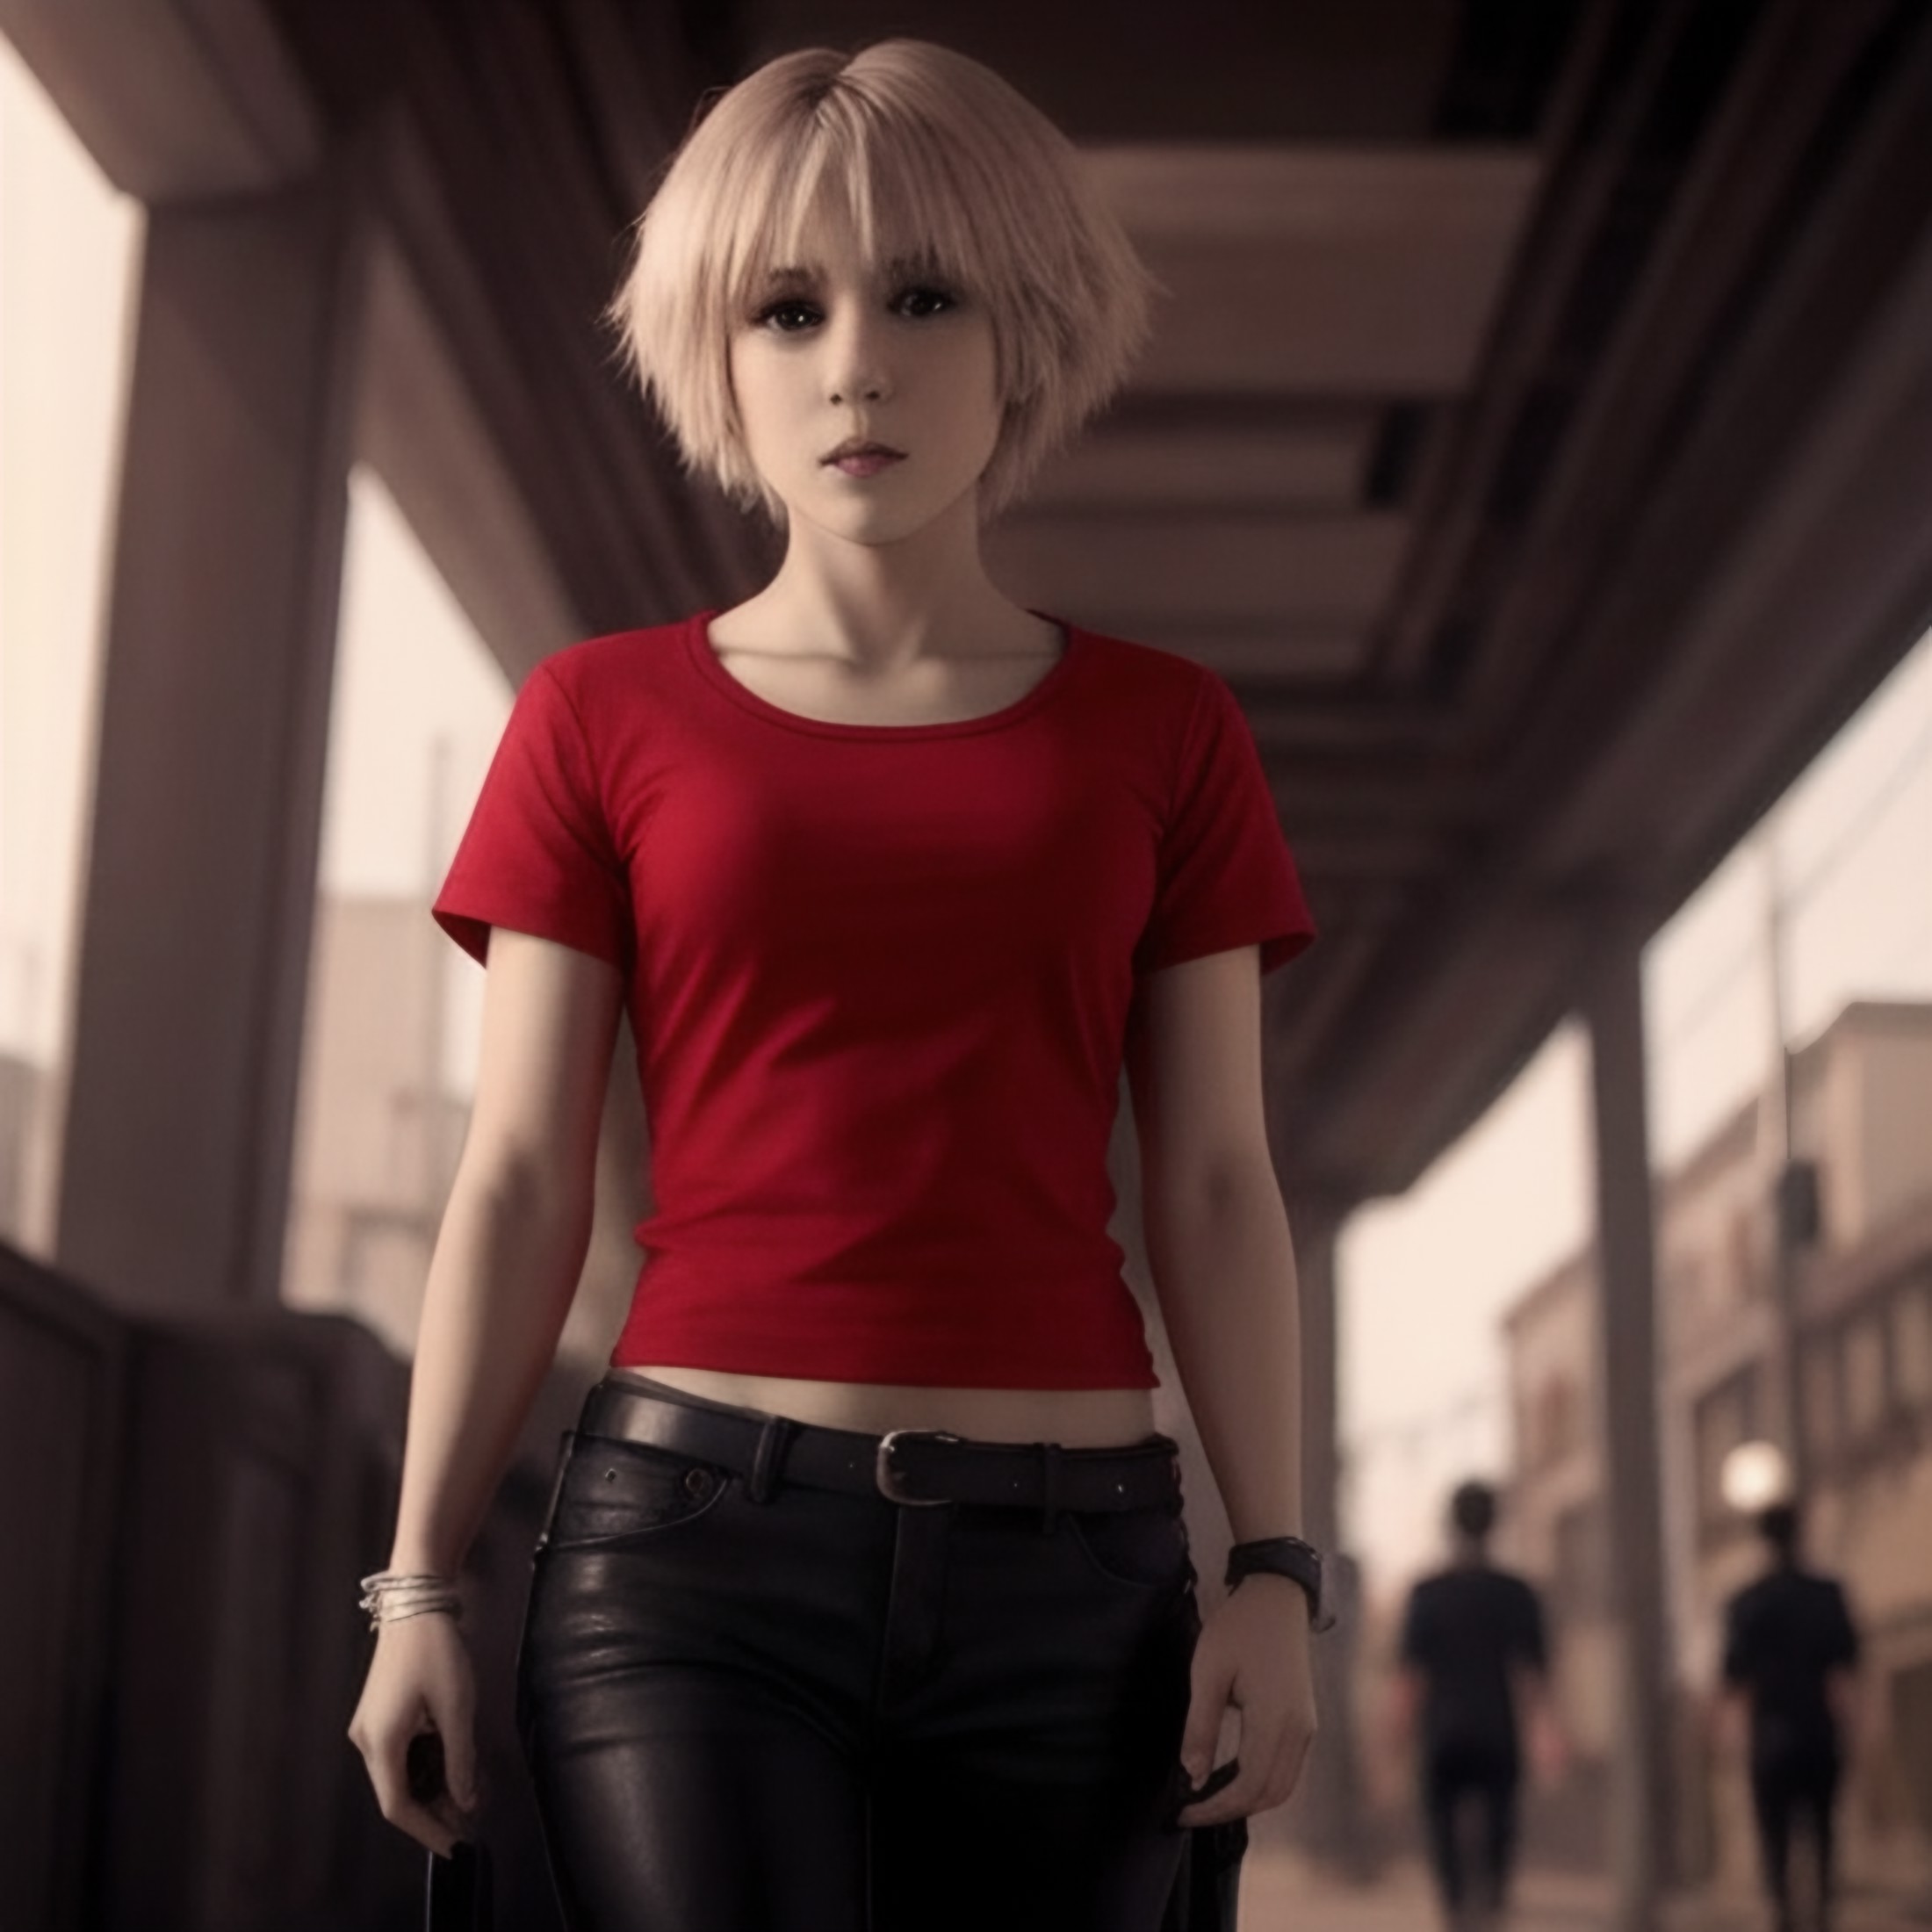 ((DSLR Photo)), ((realistic))), ChianaFarscape, wearing a red t-shirt, from nearby, (front view:1.5), soft lighting, perfe...